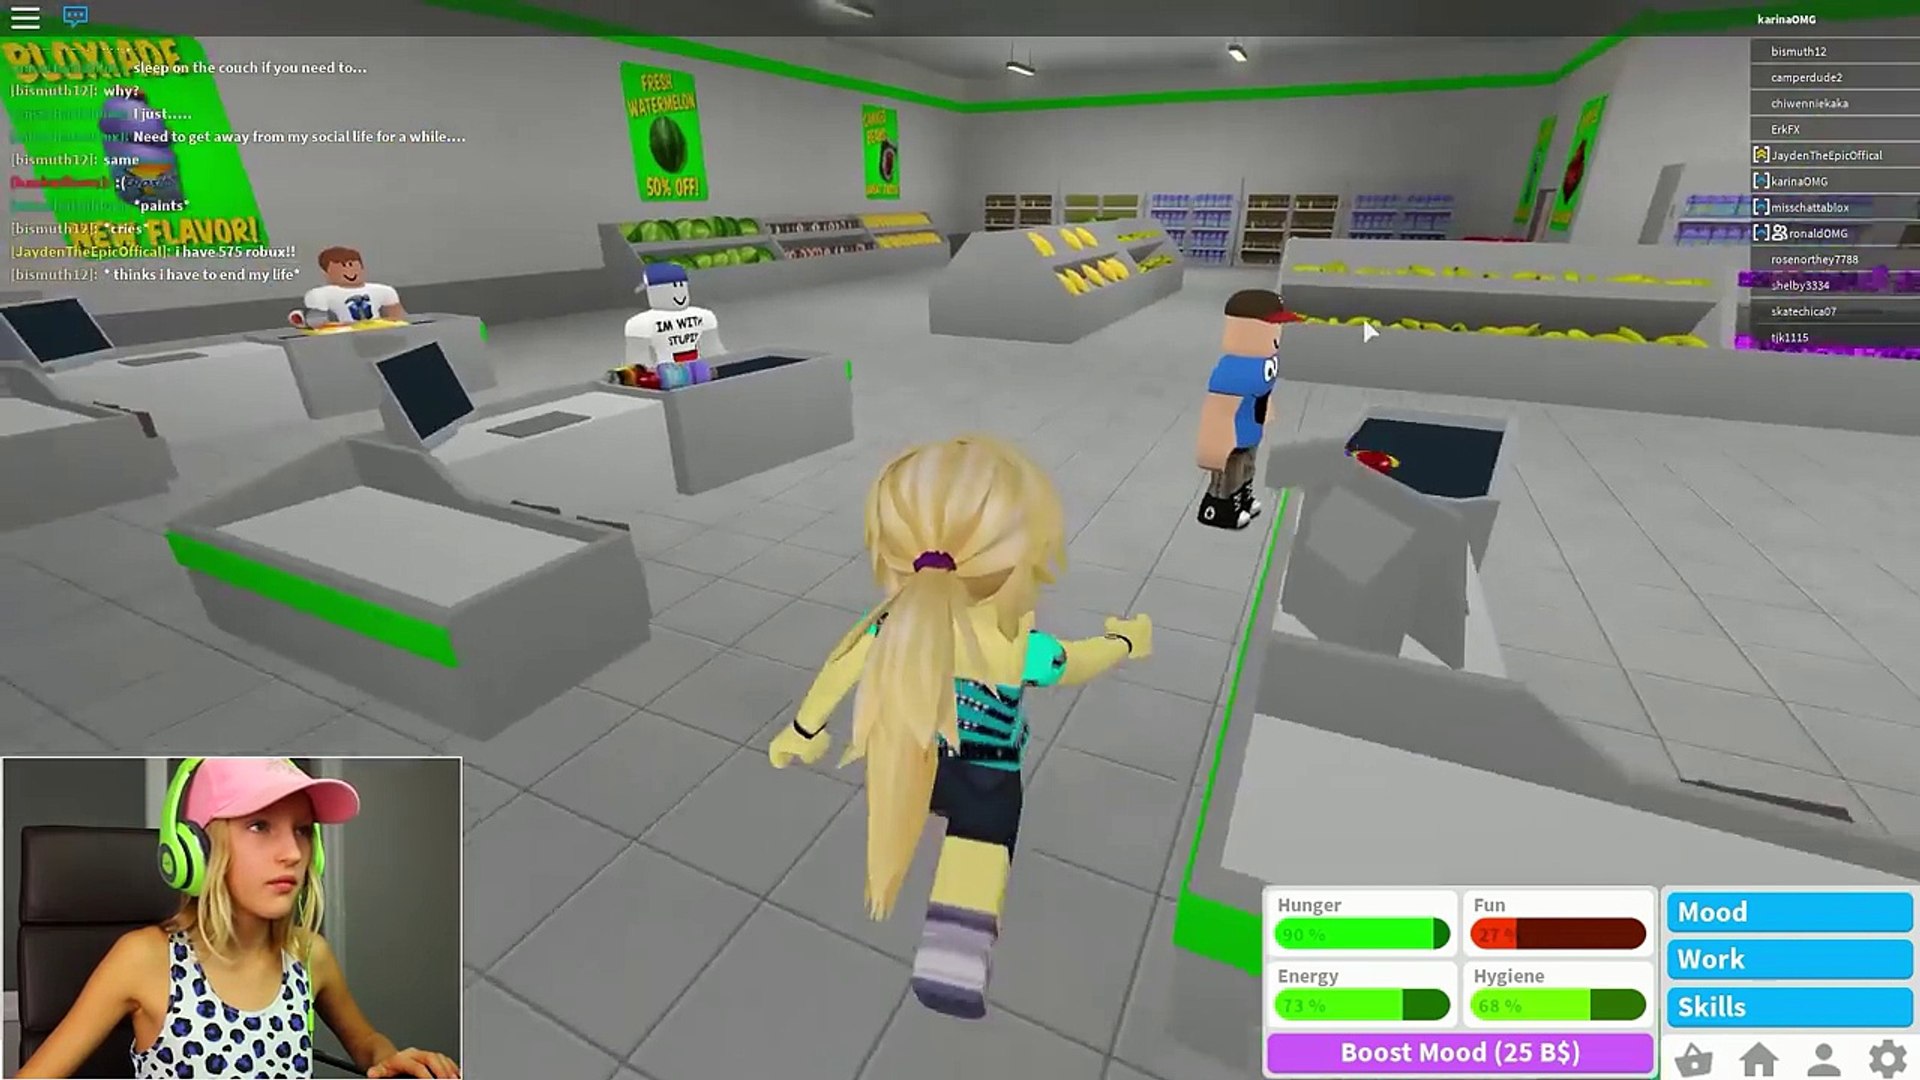 Finding A Job With Ronaldomg In Roblox Bloxburg Welcome To Bloxburg 2 - ronald omg roblox work at a pizza place